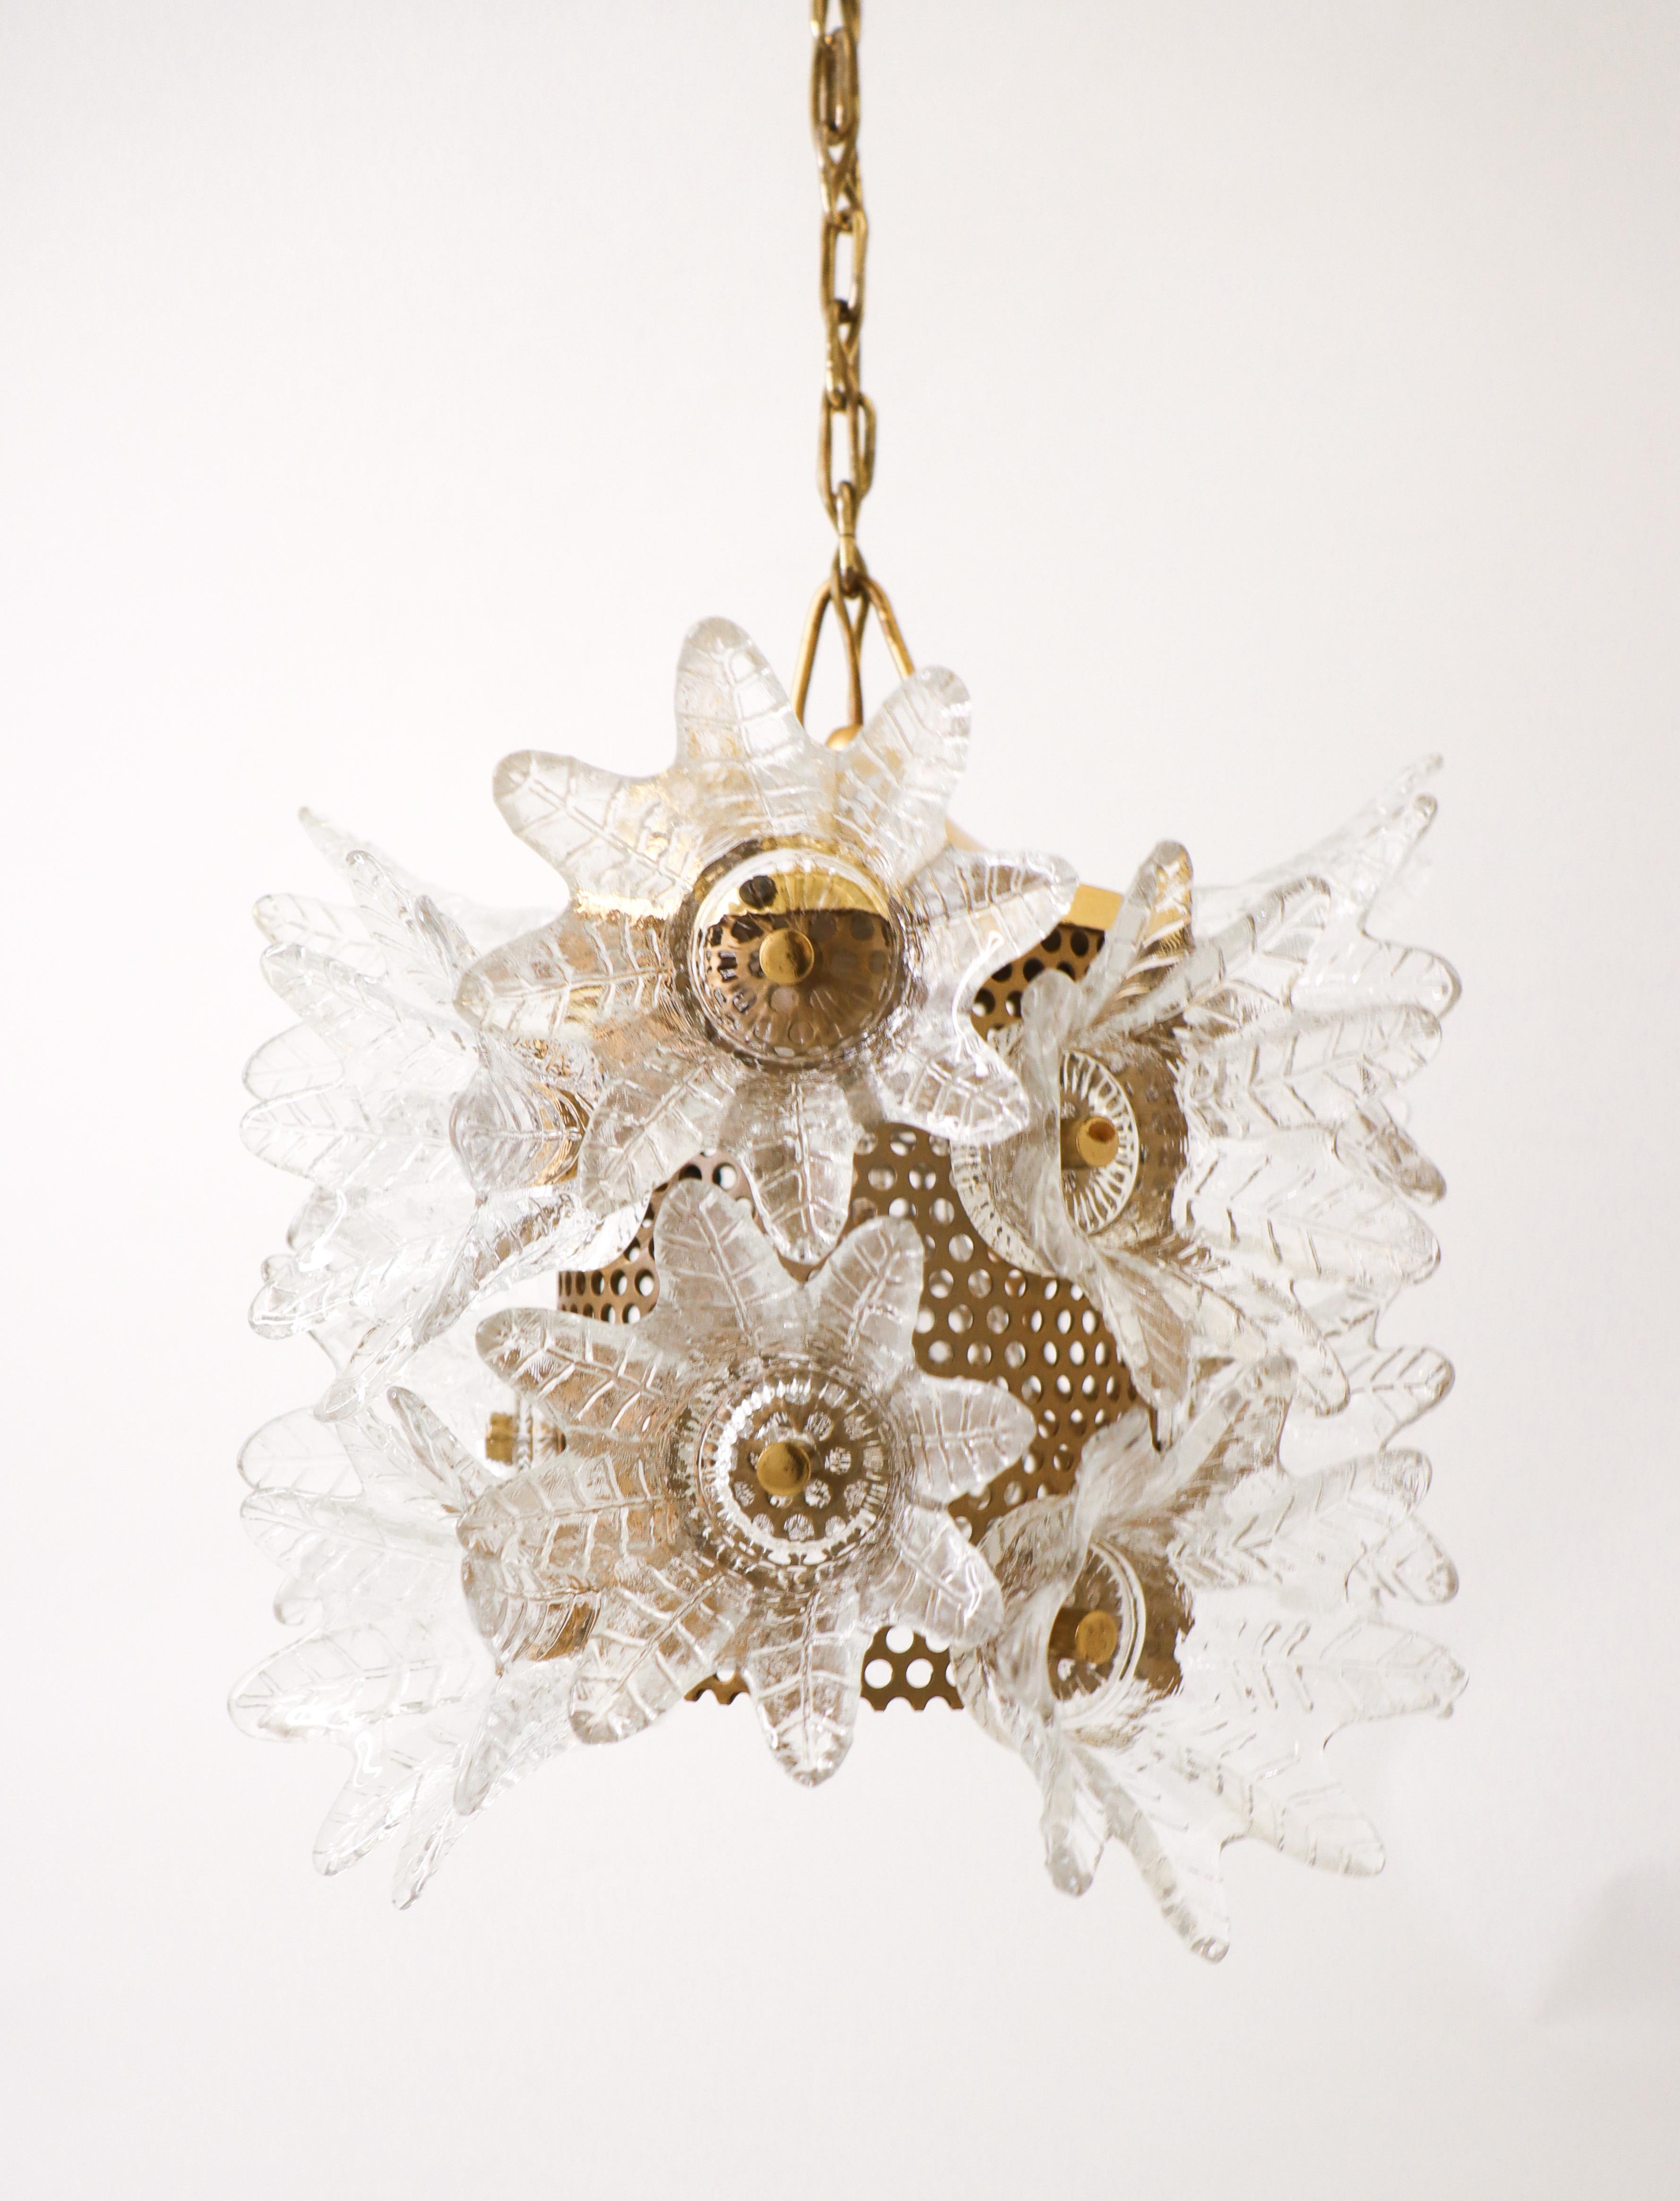 Ceiling Lamp / Pendant - Orrefors - Brass and glass flowers - 1960s In Good Condition For Sale In Stockholm, SE